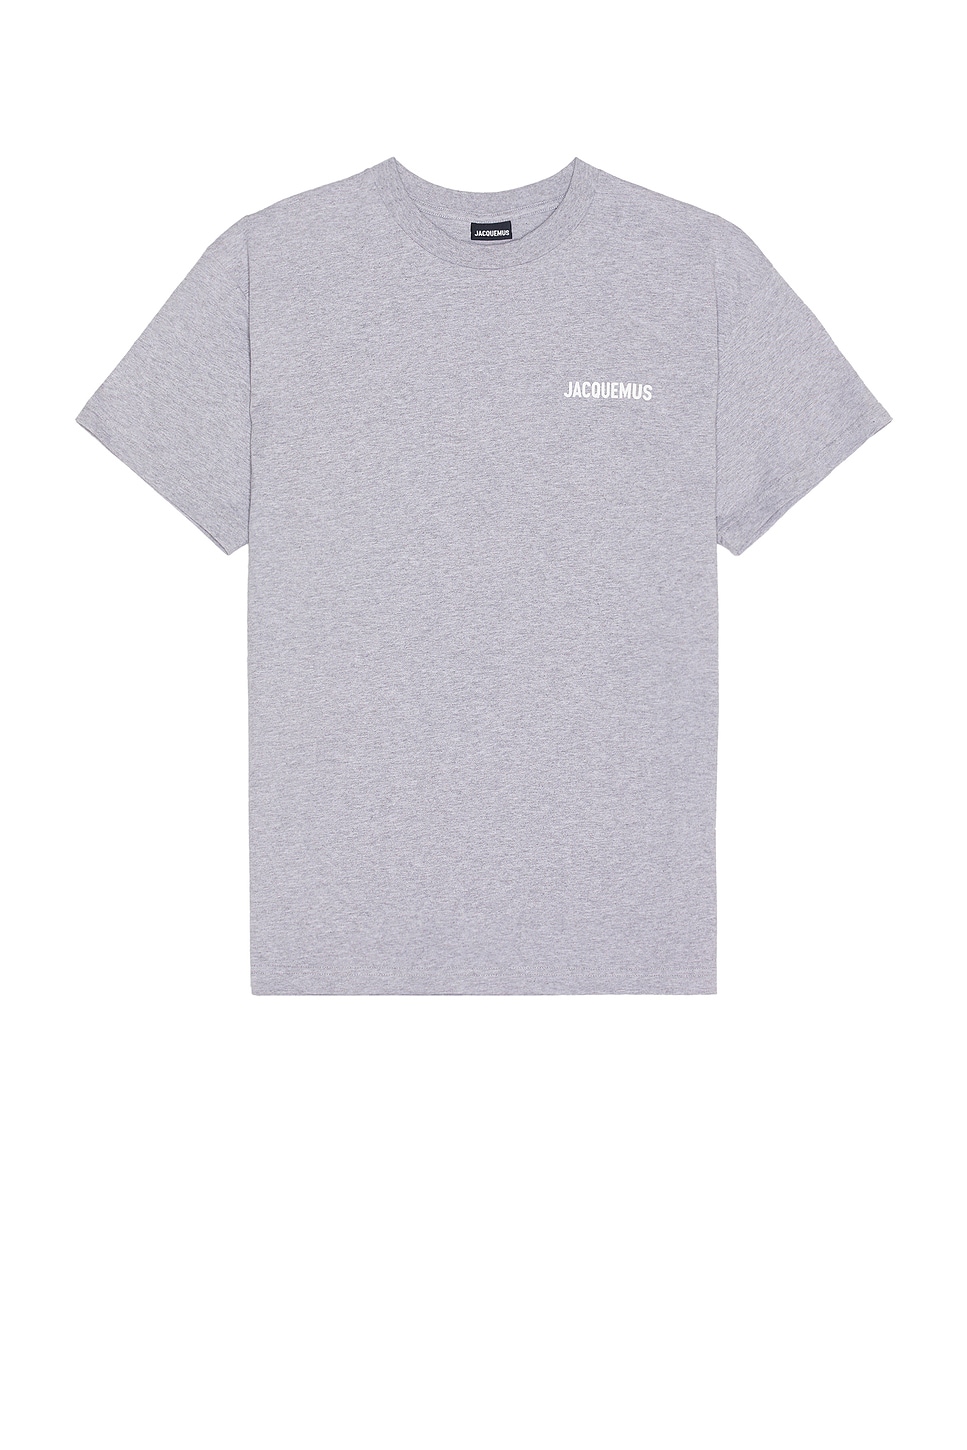 Image 1 of JACQUEMUS Le T-shirt in Grey